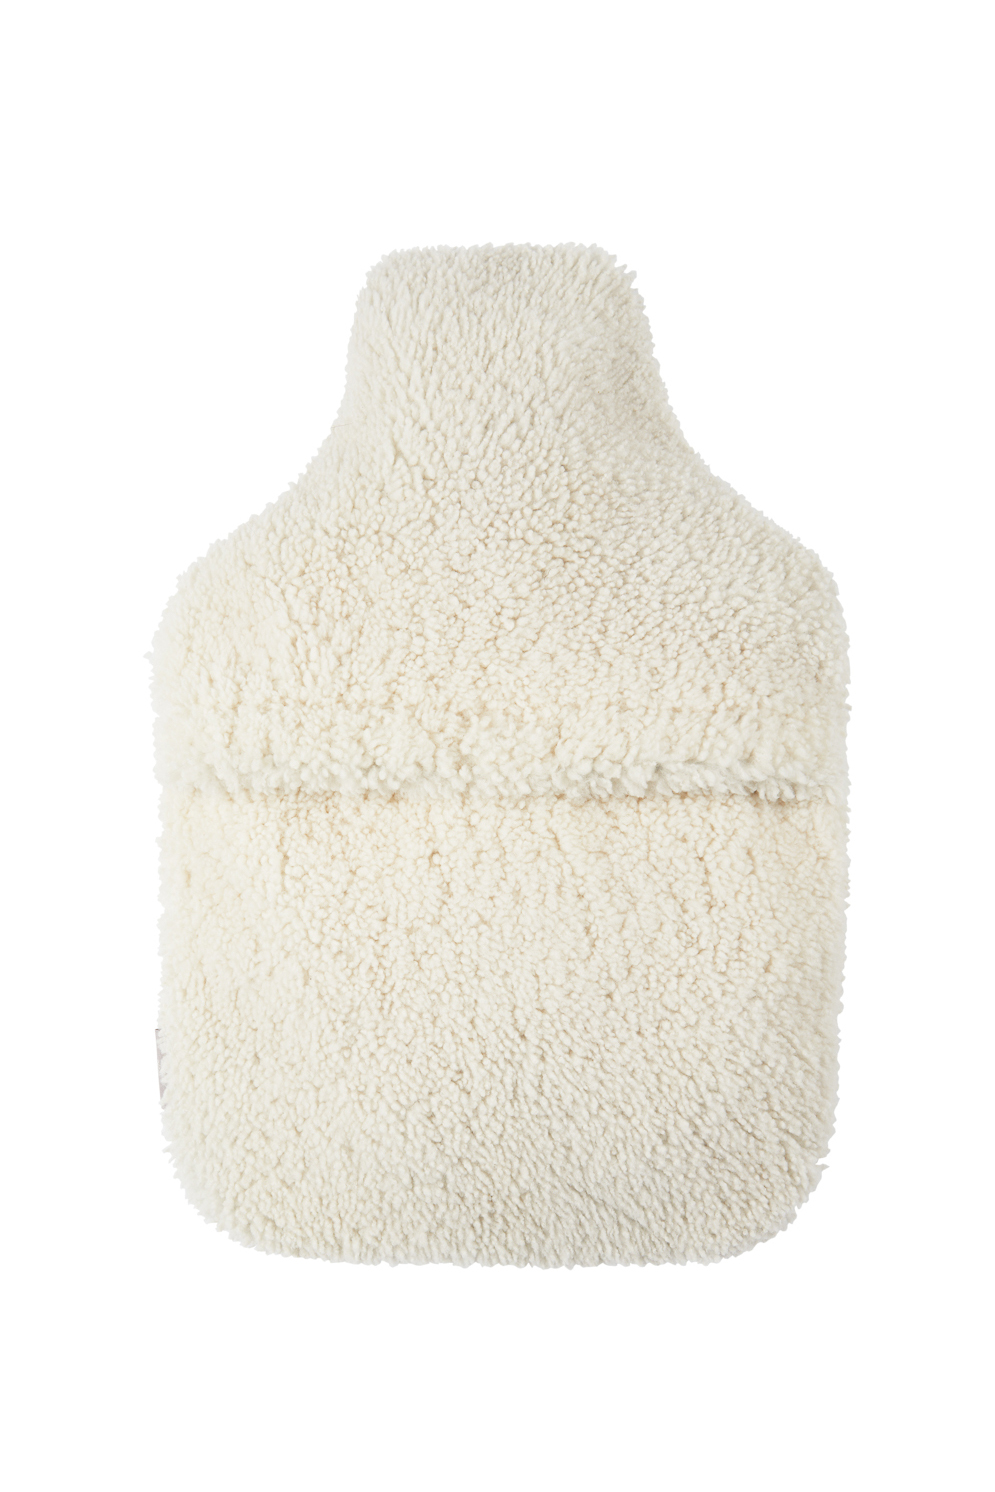 White Shearling Hot Water Bottle Cover | Homeware | Gushlow & Cole - back